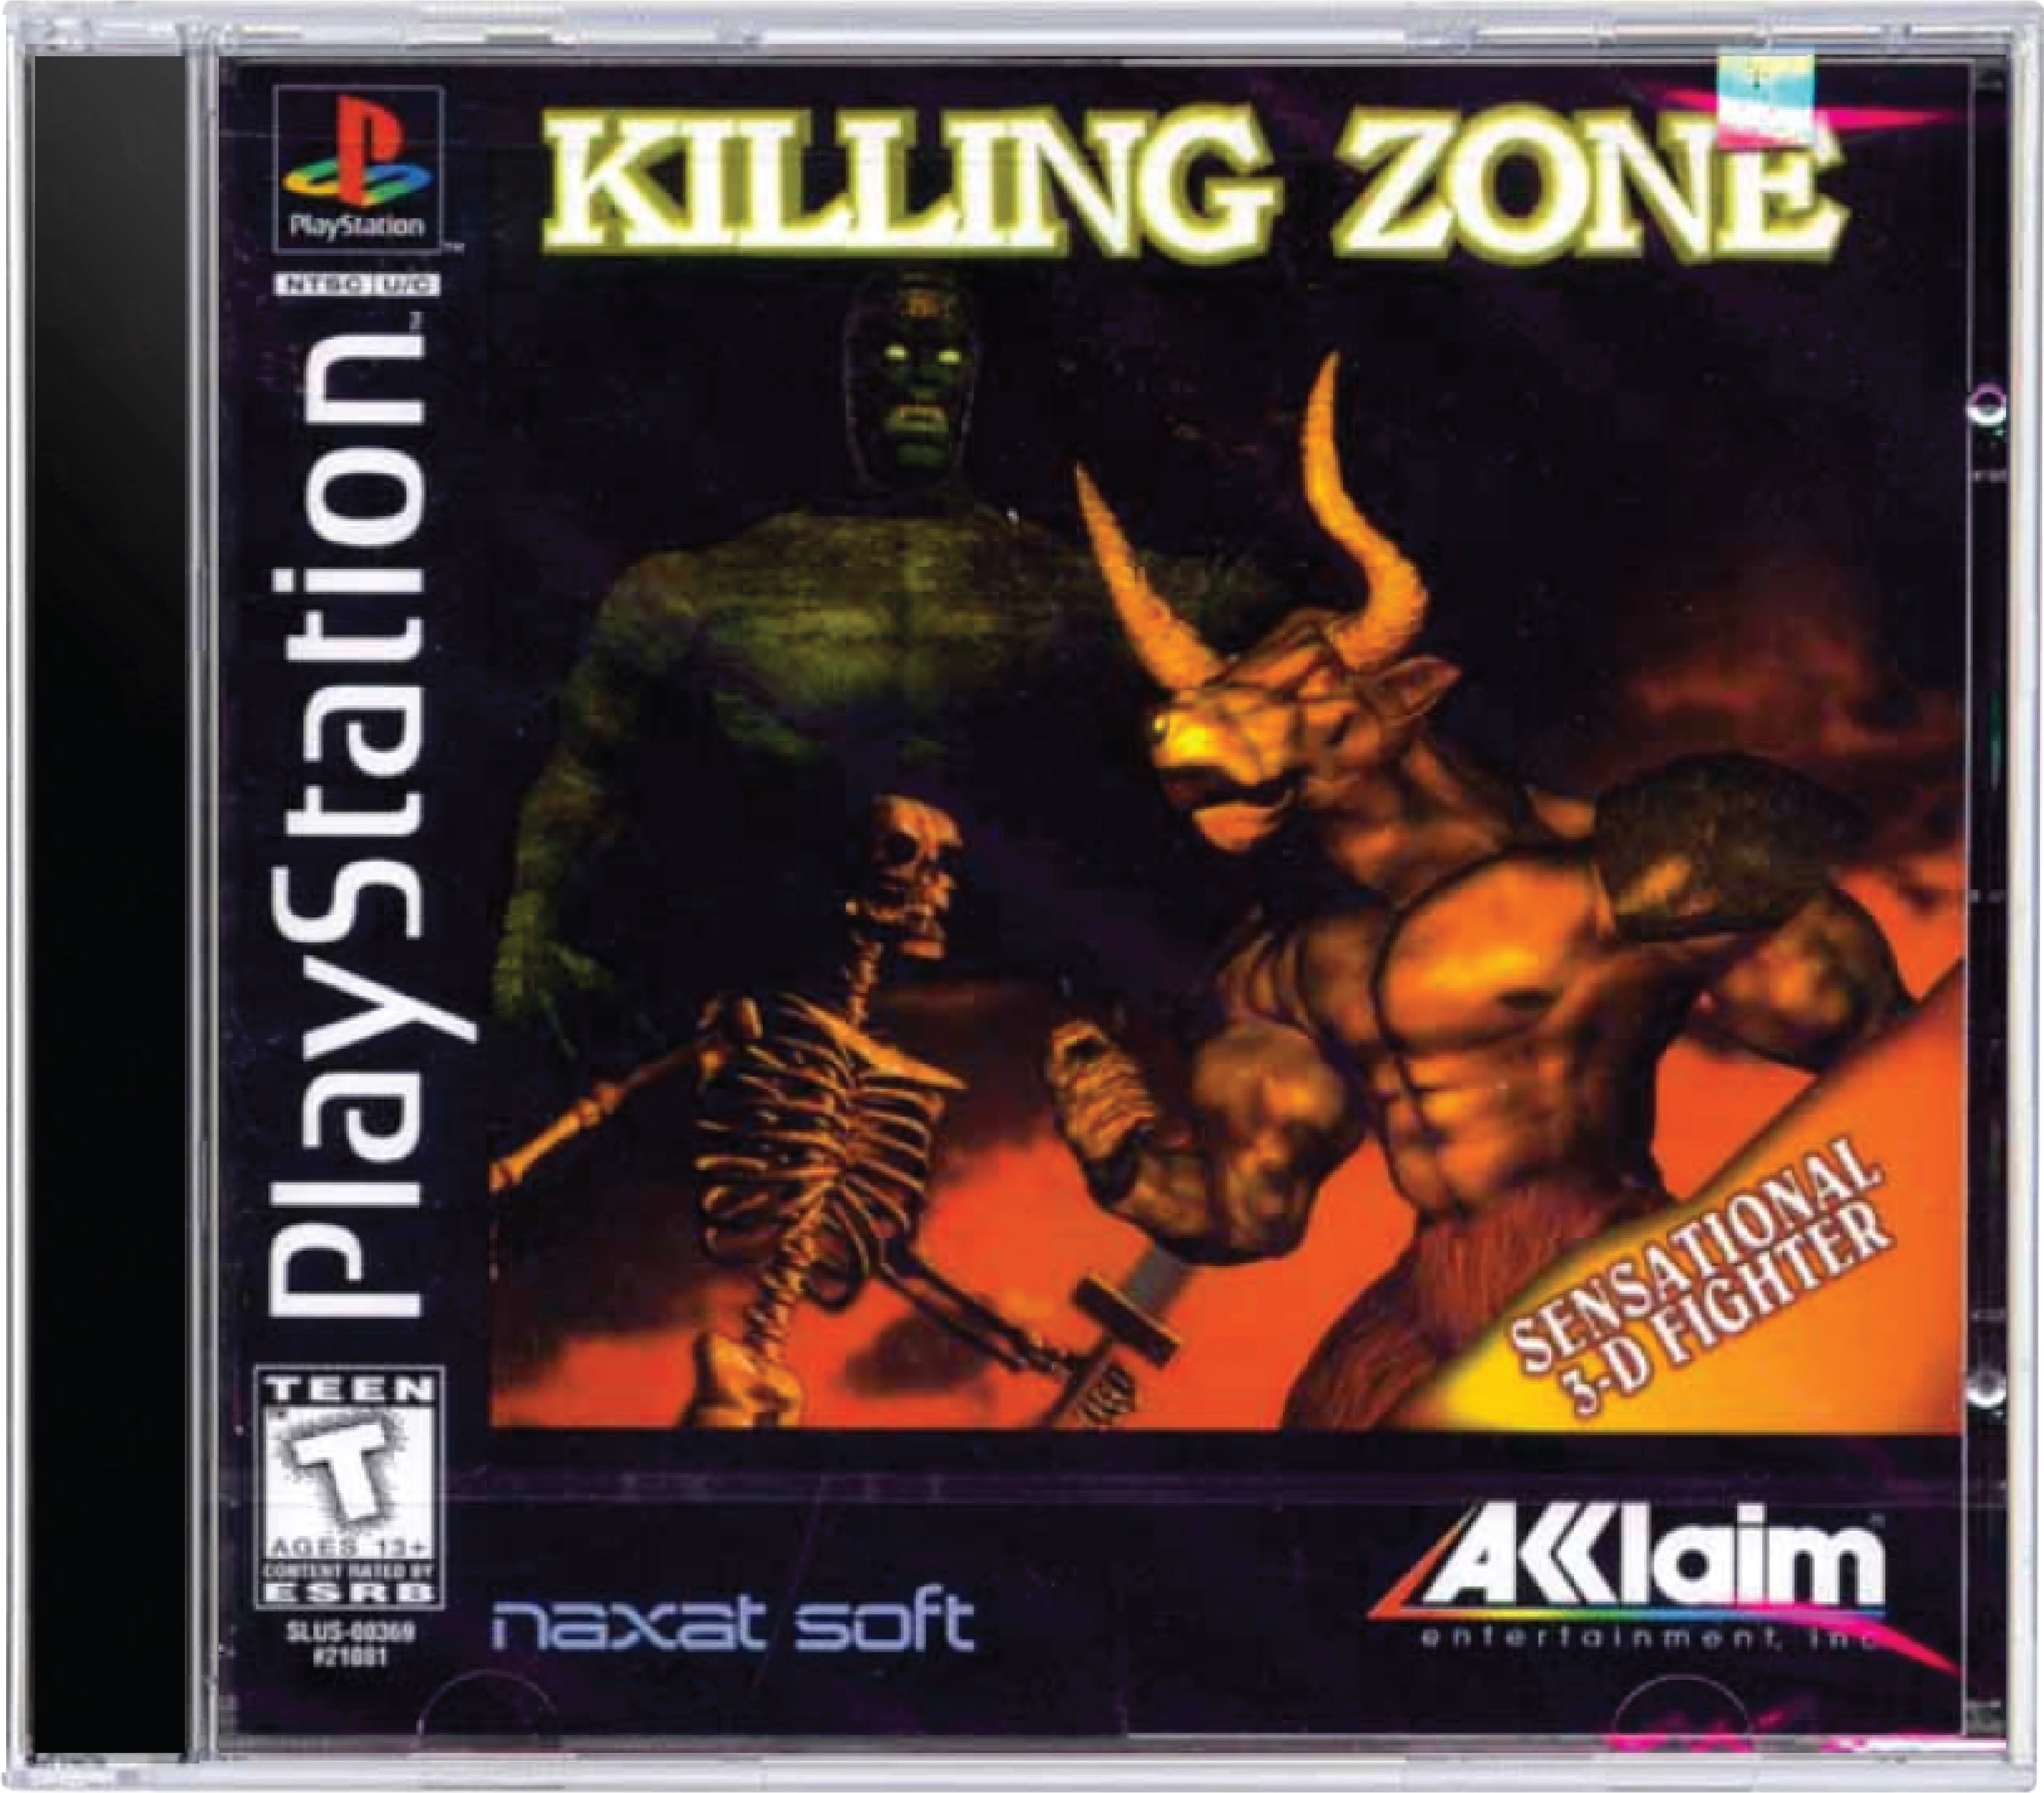 Killing Zone Cover Art and Product Photo